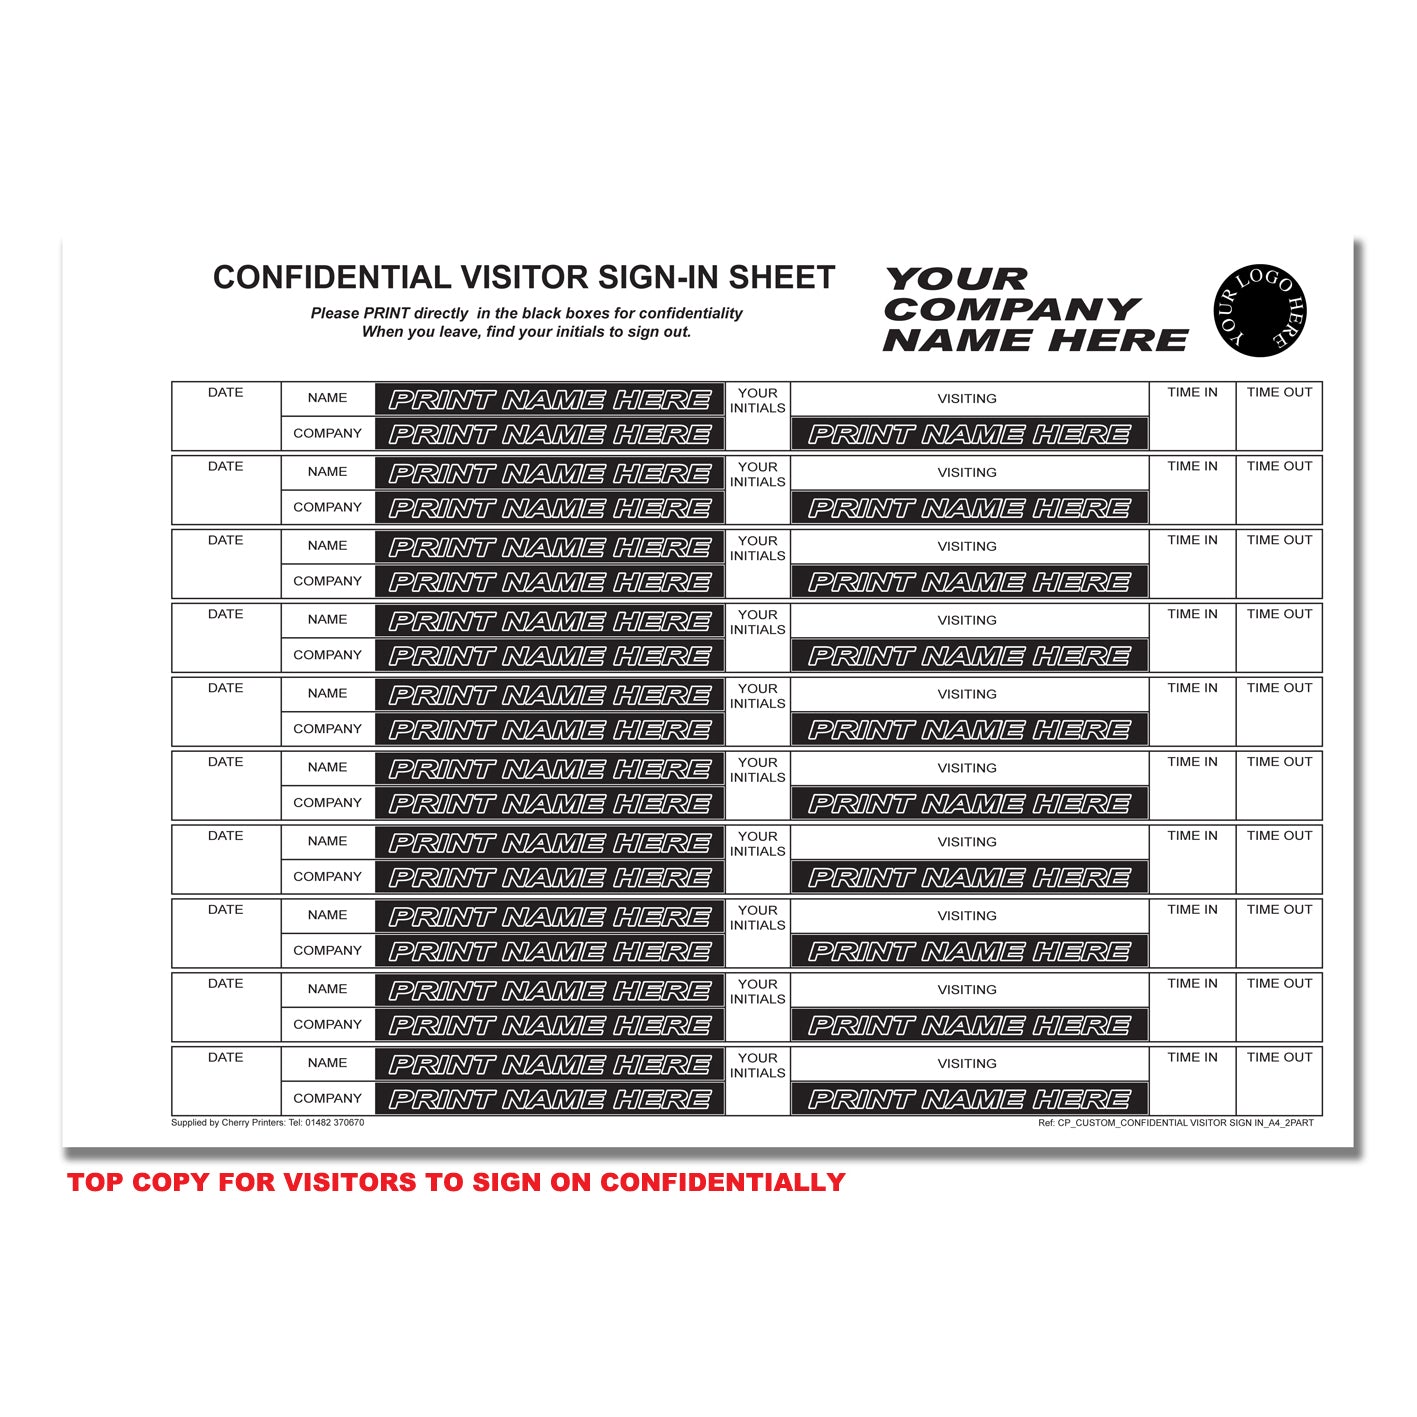 NCR *CUSTOM* Confidential Visitor Sign in Duplicate Wiro Book A4 50 sets GDPR | 2 Book Pack